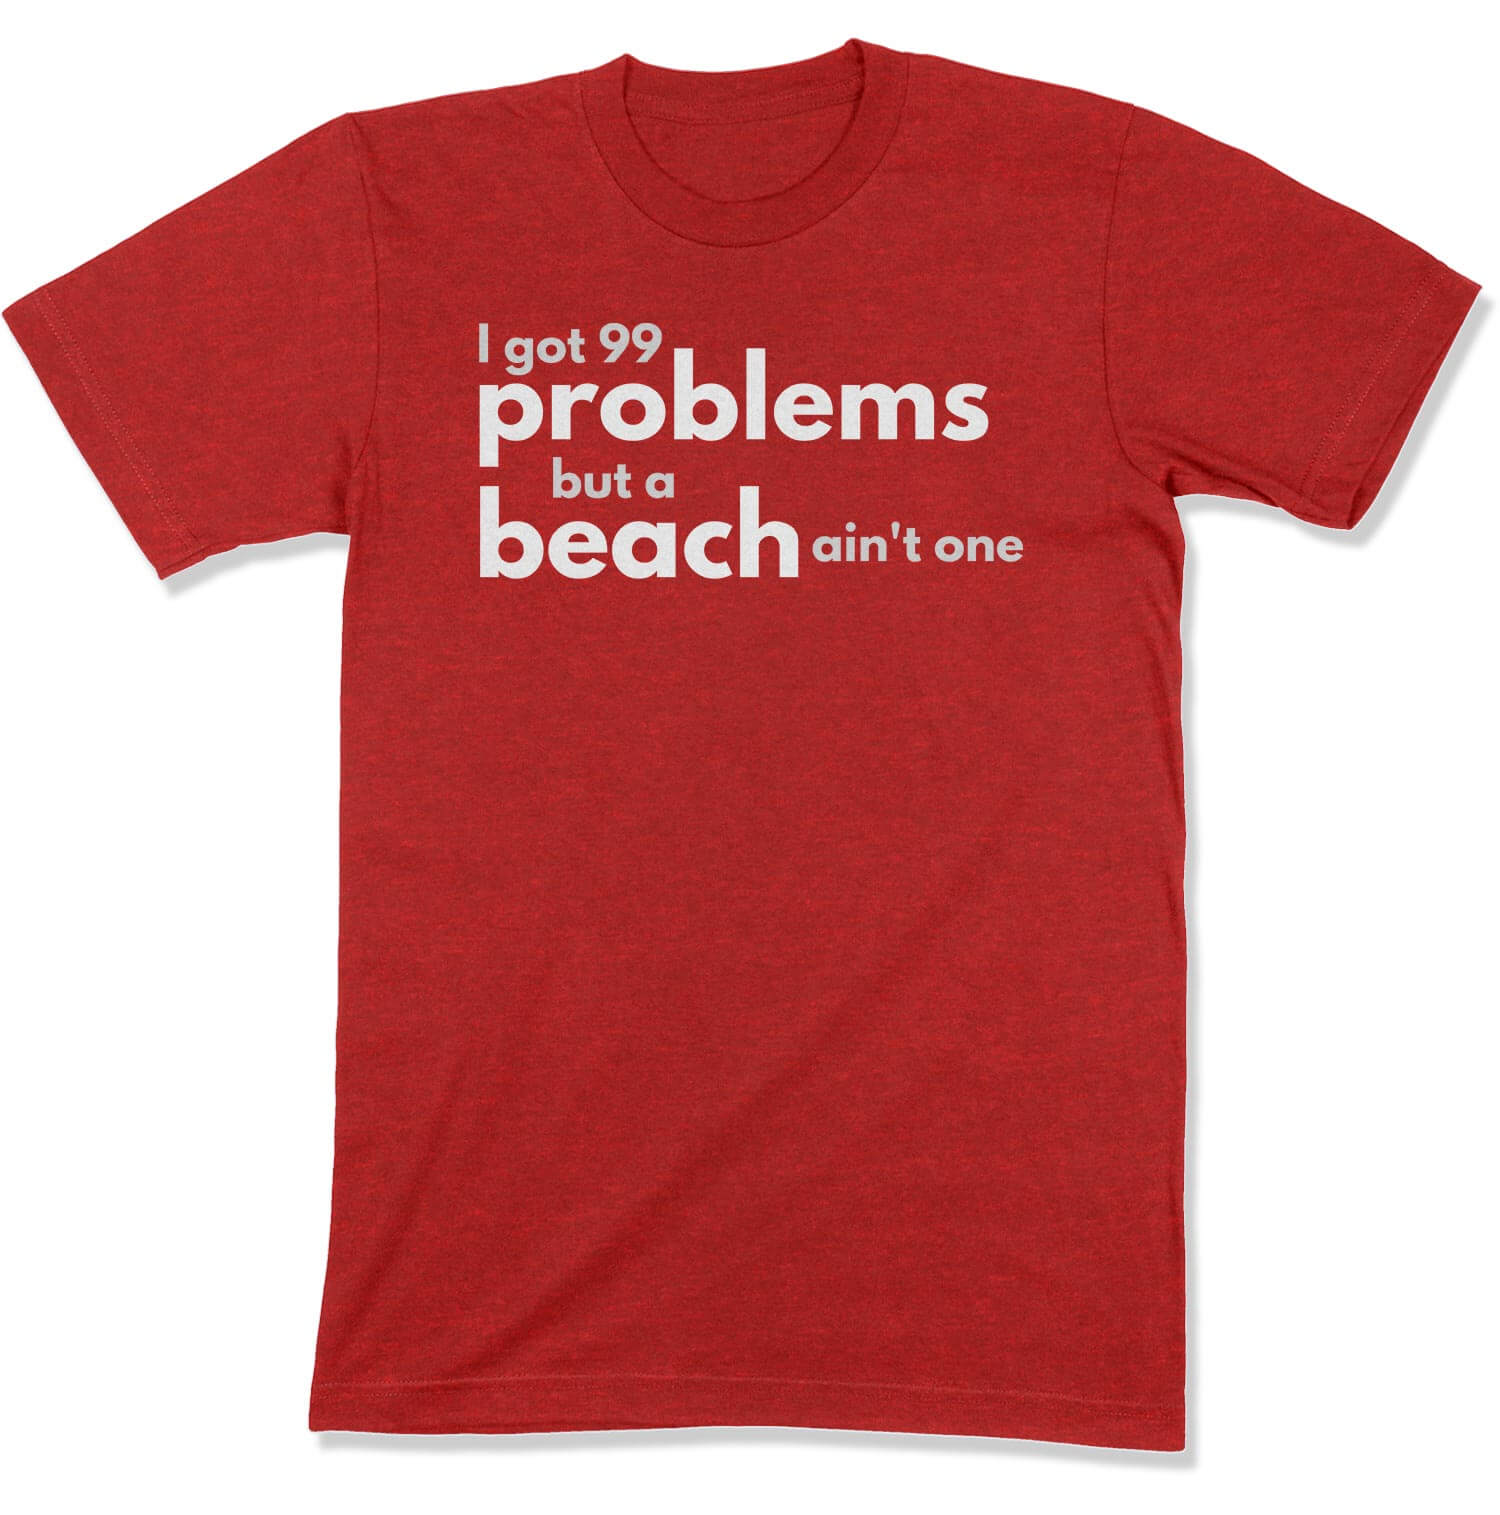 99 Problems Unisex T-Shirt in Color: Heather Red - East Coast AF Apparel